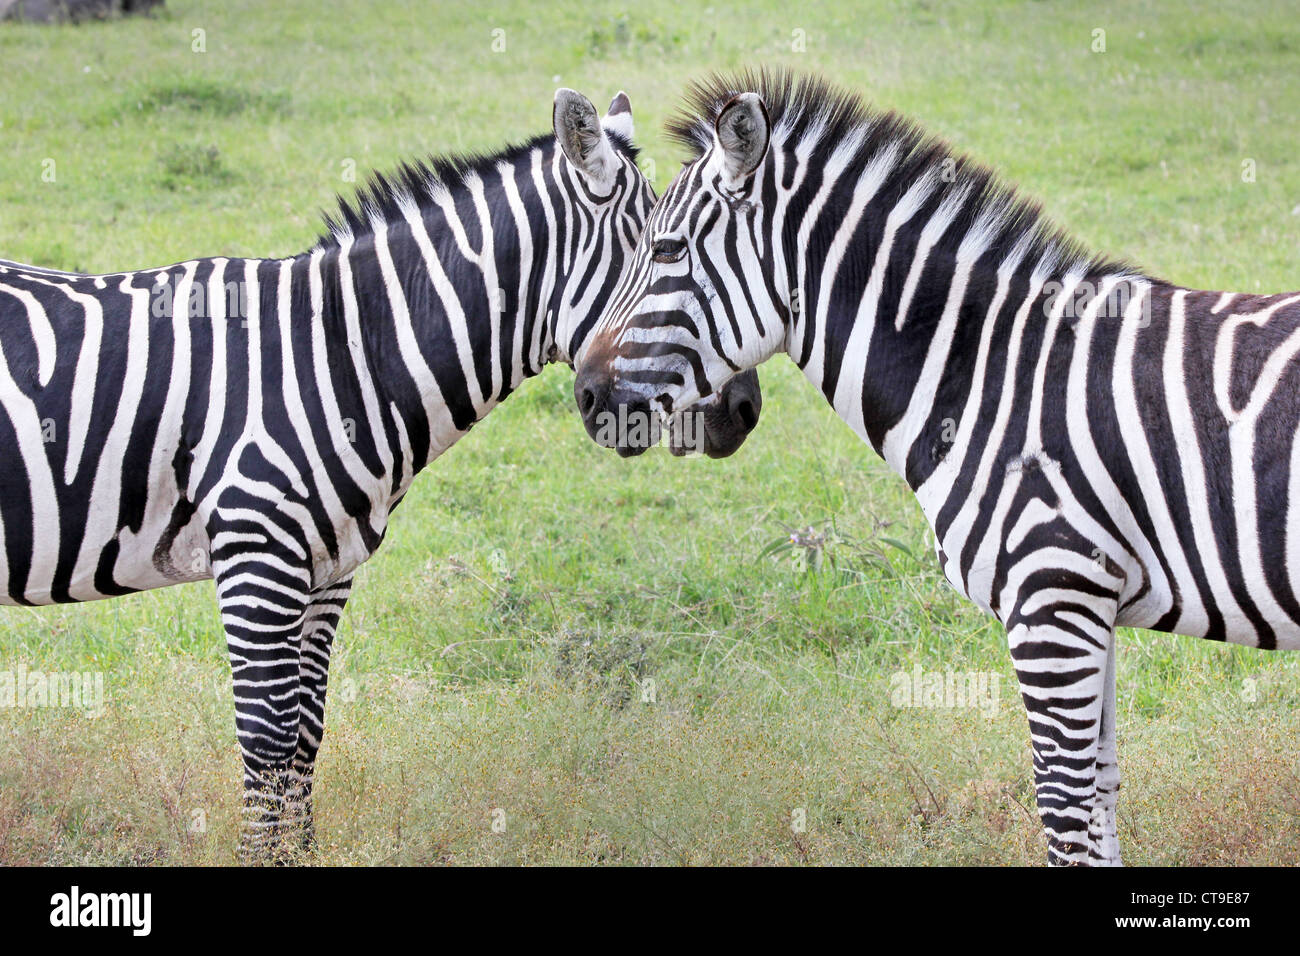 Two WILD Zebra (Equus quagga) create perfect symmetry and harmony while standing face to face in Kenya, Africa. Stock Photo